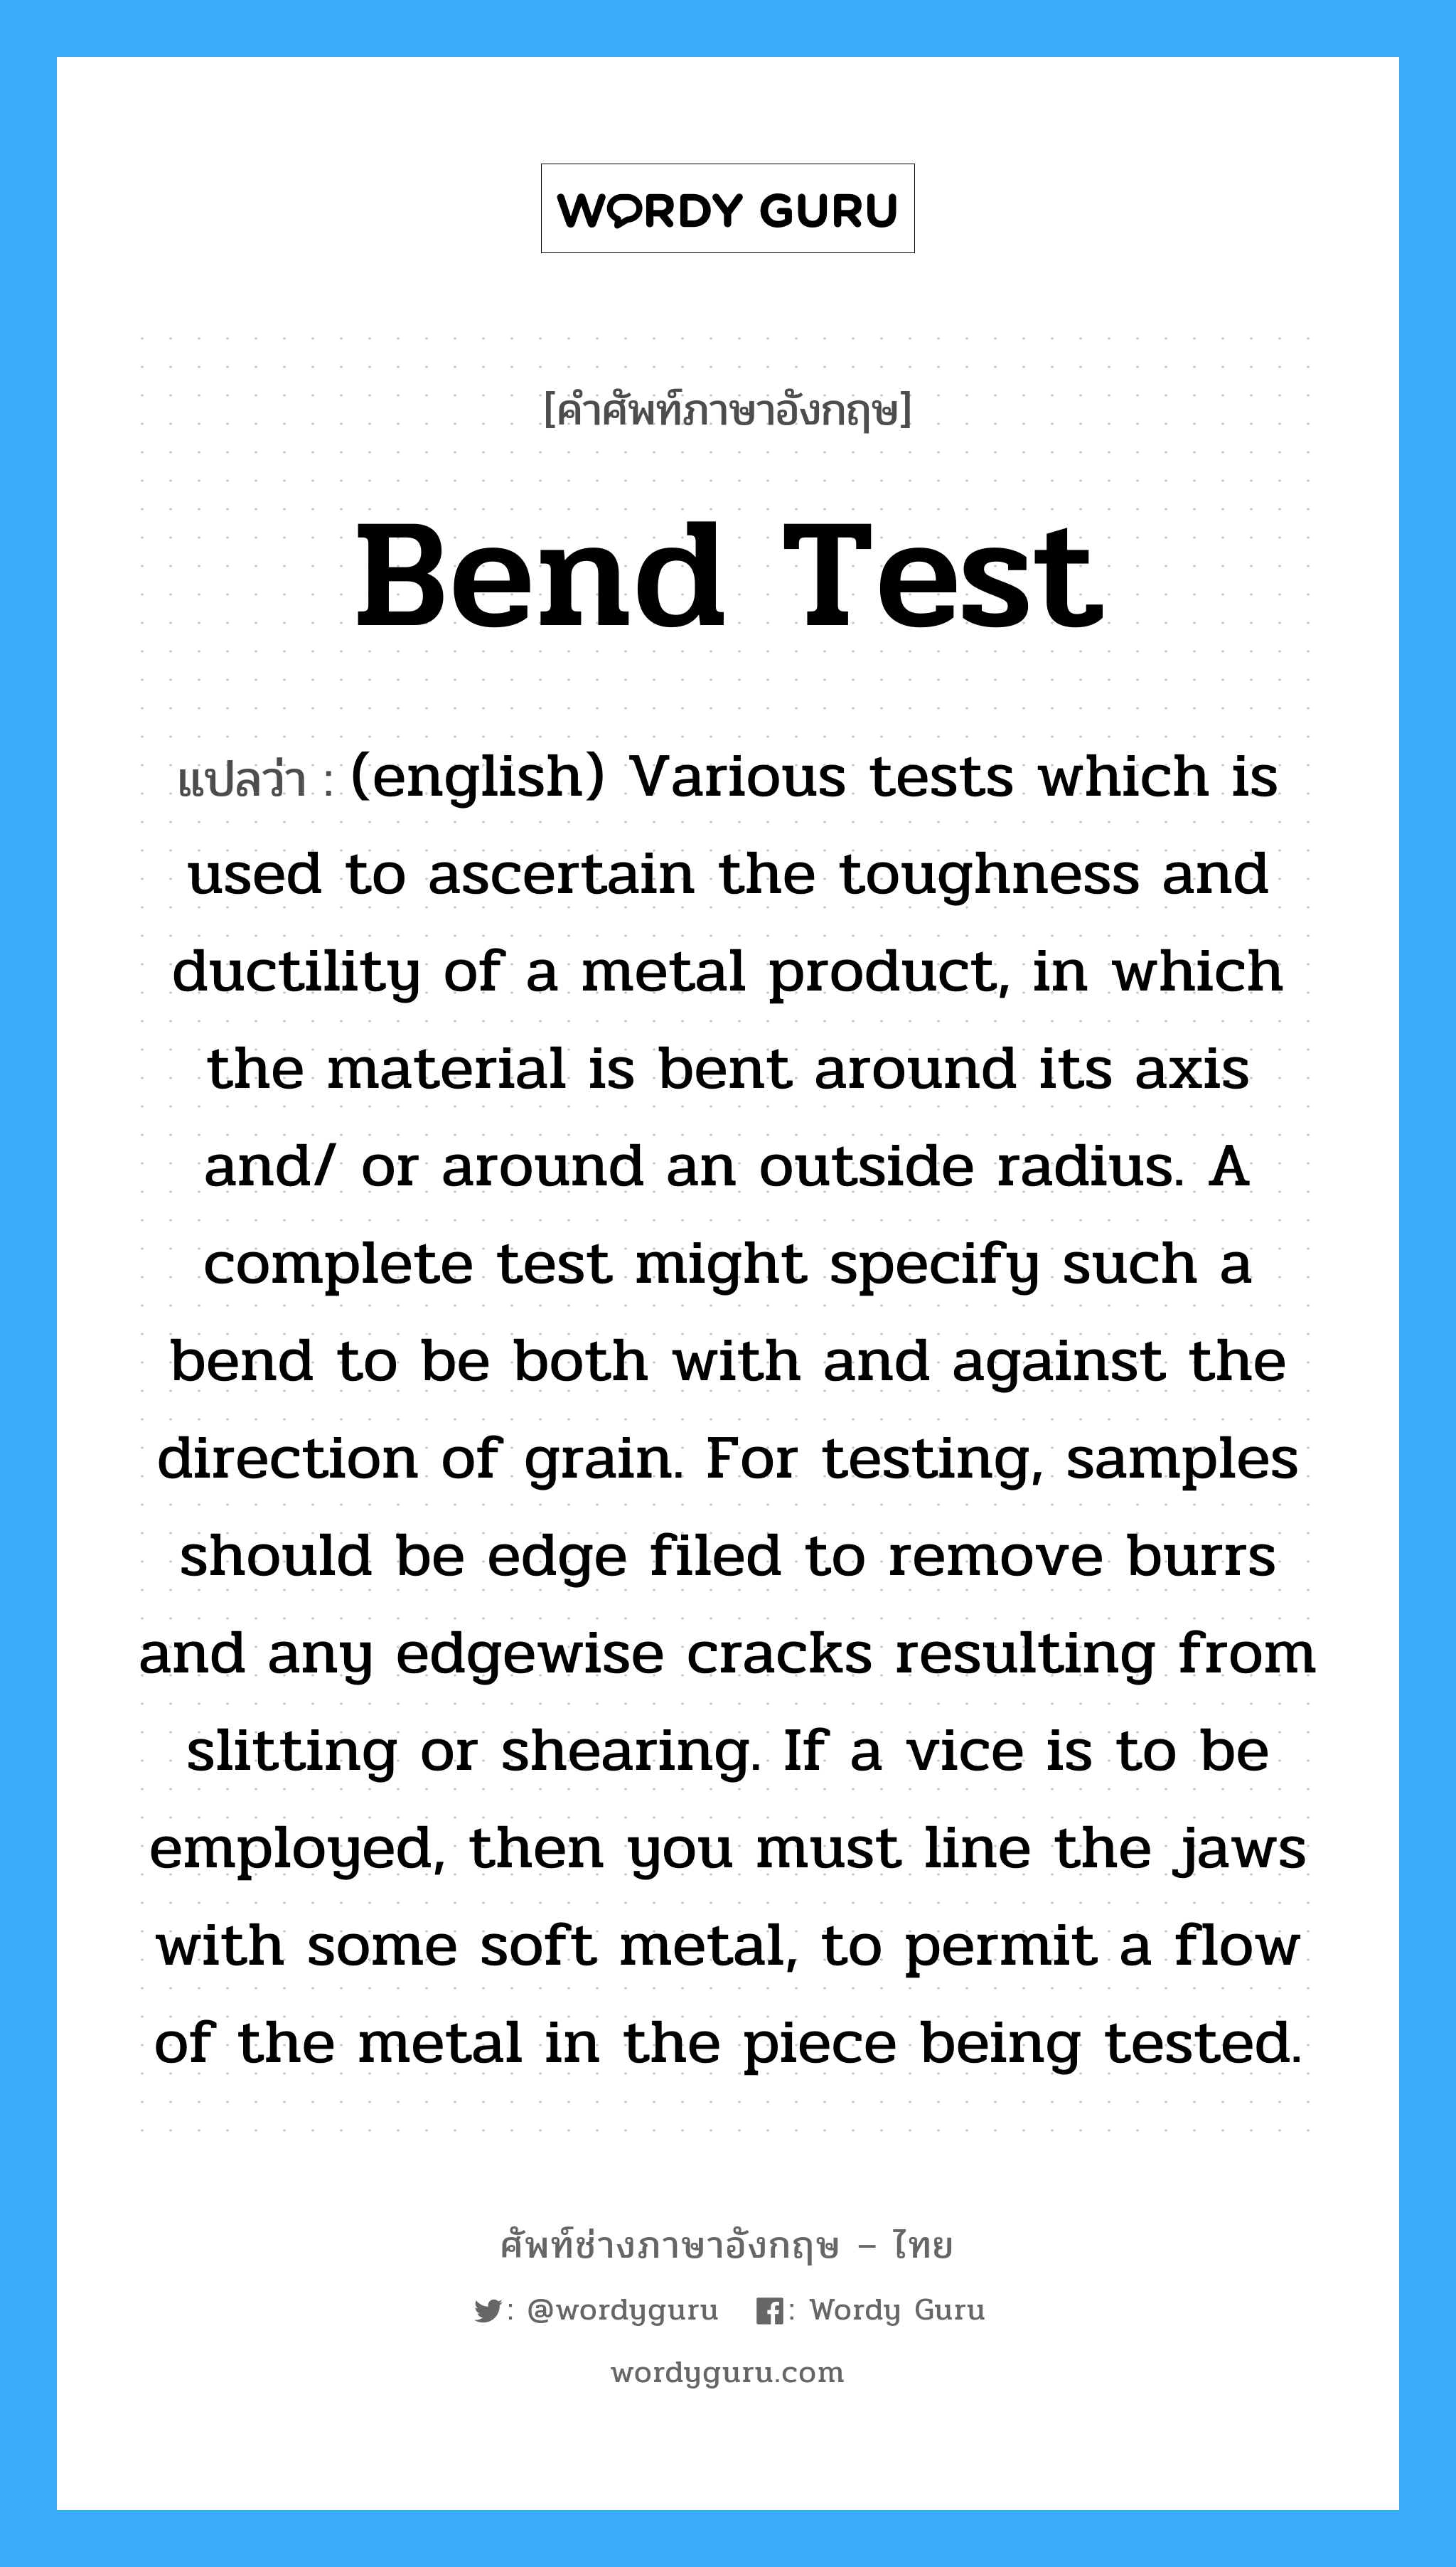 (english) Various tests which is used to ascertain the toughness and ductility of a metal product, in which the material is bent around its axis and/ or around an outside radius. A complete test might specify such a bend to be both with and against the direction of grain. For testing, samples should be edge filed to remove burrs and any edgewise cracks resulting from slitting or shearing. If a vice is to be employed, then you must line the jaws with some soft metal, to permit a flow of the metal in the piece being tested. ภาษาอังกฤษ?, คำศัพท์ช่างภาษาอังกฤษ - ไทย (english) Various tests which is used to ascertain the toughness and ductility of a metal product, in which the material is bent around its axis and/ or around an outside radius. A complete test might specify such a bend to be both with and against the direction of grain. For testing, samples should be edge filed to remove burrs and any edgewise cracks resulting from slitting or shearing. If a vice is to be employed, then you must line the jaws with some soft metal, to permit a flow of the metal in the piece being tested. คำศัพท์ภาษาอังกฤษ (english) Various tests which is used to ascertain the toughness and ductility of a metal product, in which the material is bent around its axis and/ or around an outside radius. A complete test might specify such a bend to be both with and against the direction of grain. For testing, samples should be edge filed to remove burrs and any edgewise cracks resulting from slitting or shearing. If a vice is to be employed, then you must line the jaws with some soft metal, to permit a flow of the metal in the piece being tested. แปลว่า Bend Test